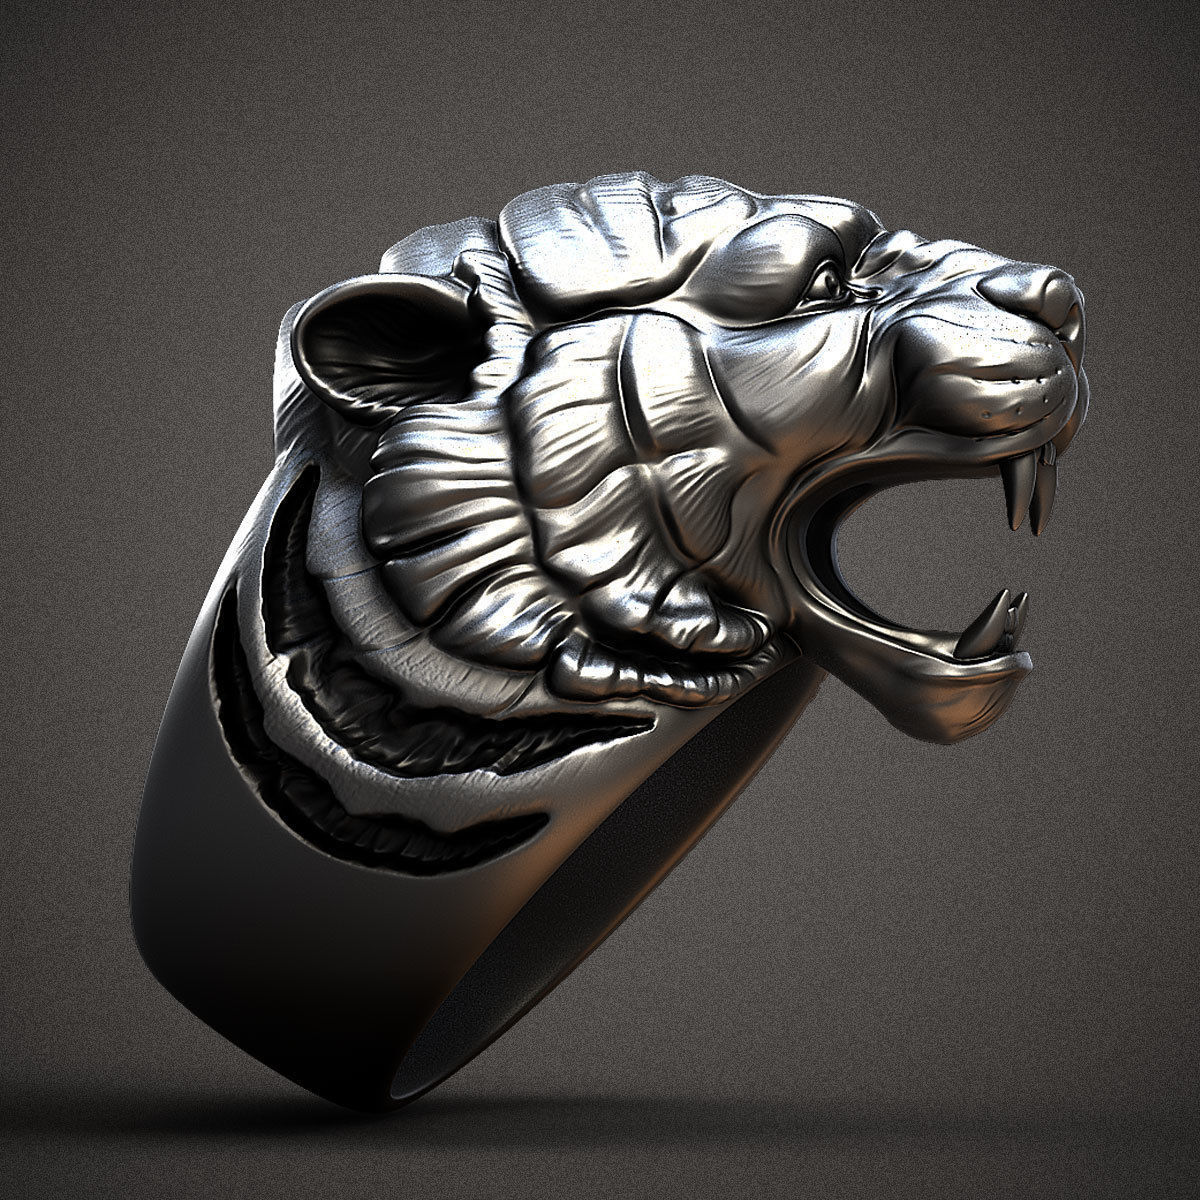 Stainless Steel Casting Rings Mens Punk| Alibaba.com